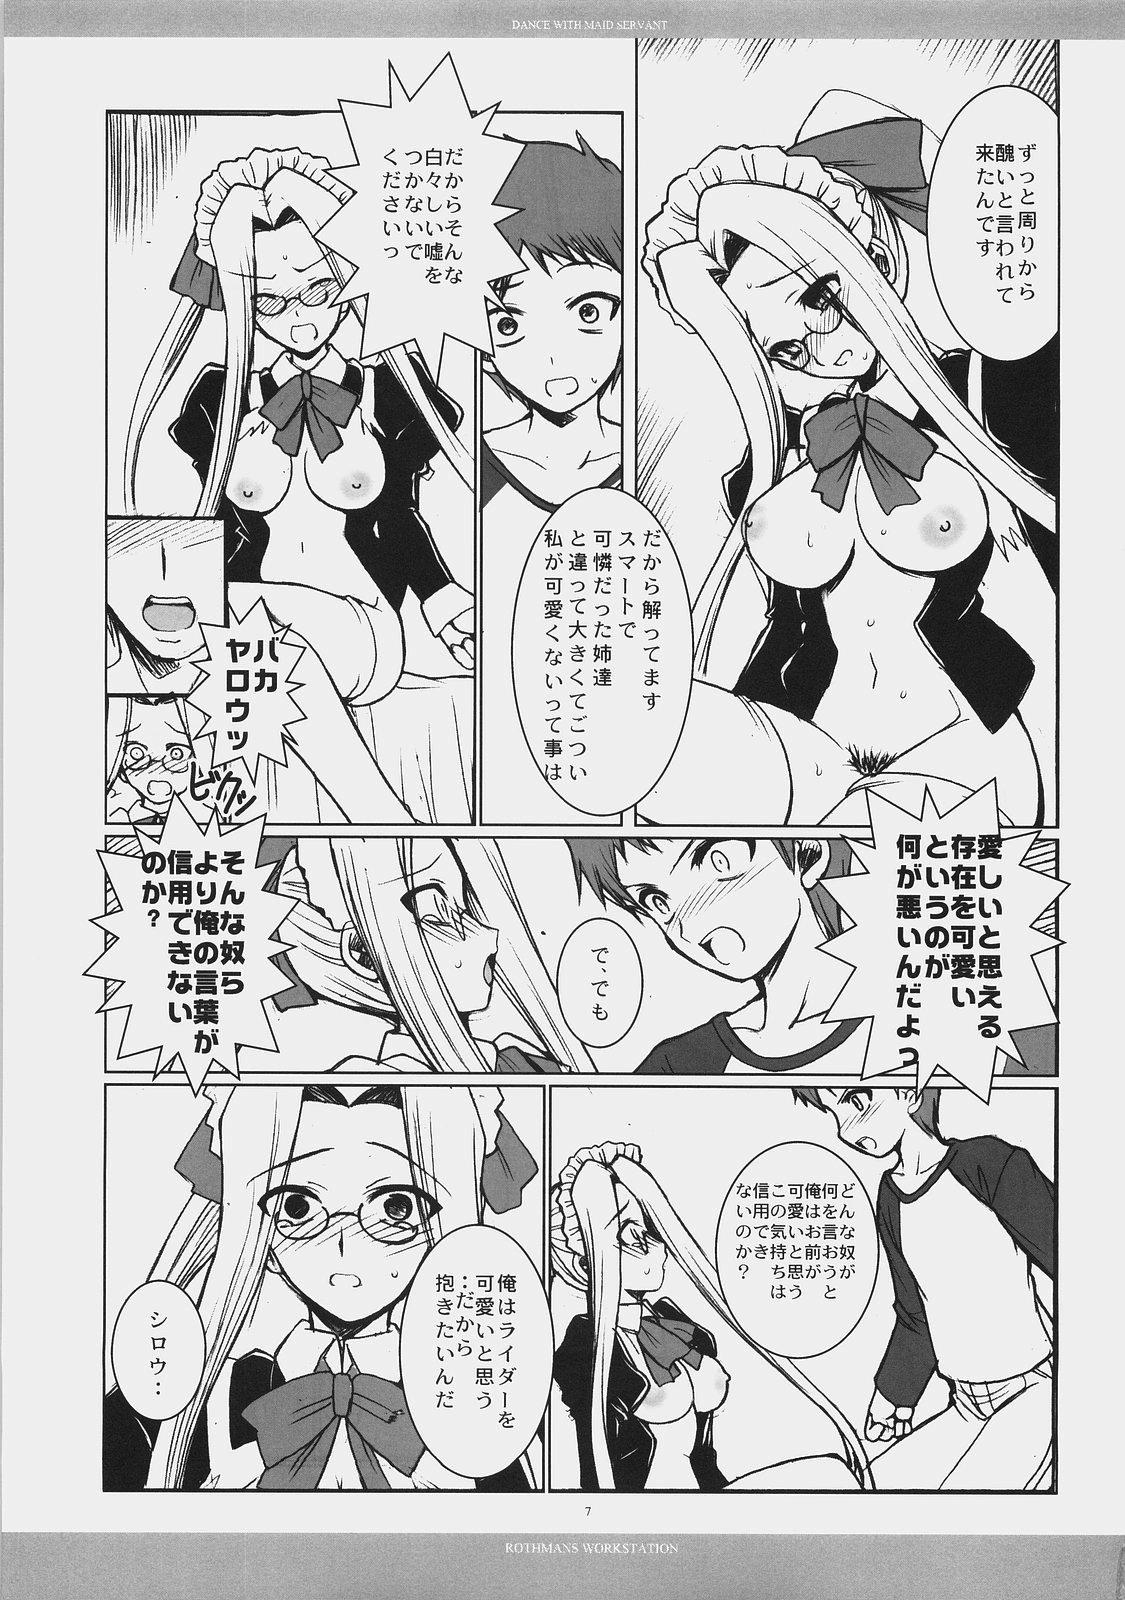 Flash Dance with Maid Servant - Fate hollow ataraxia Clothed - Page 6